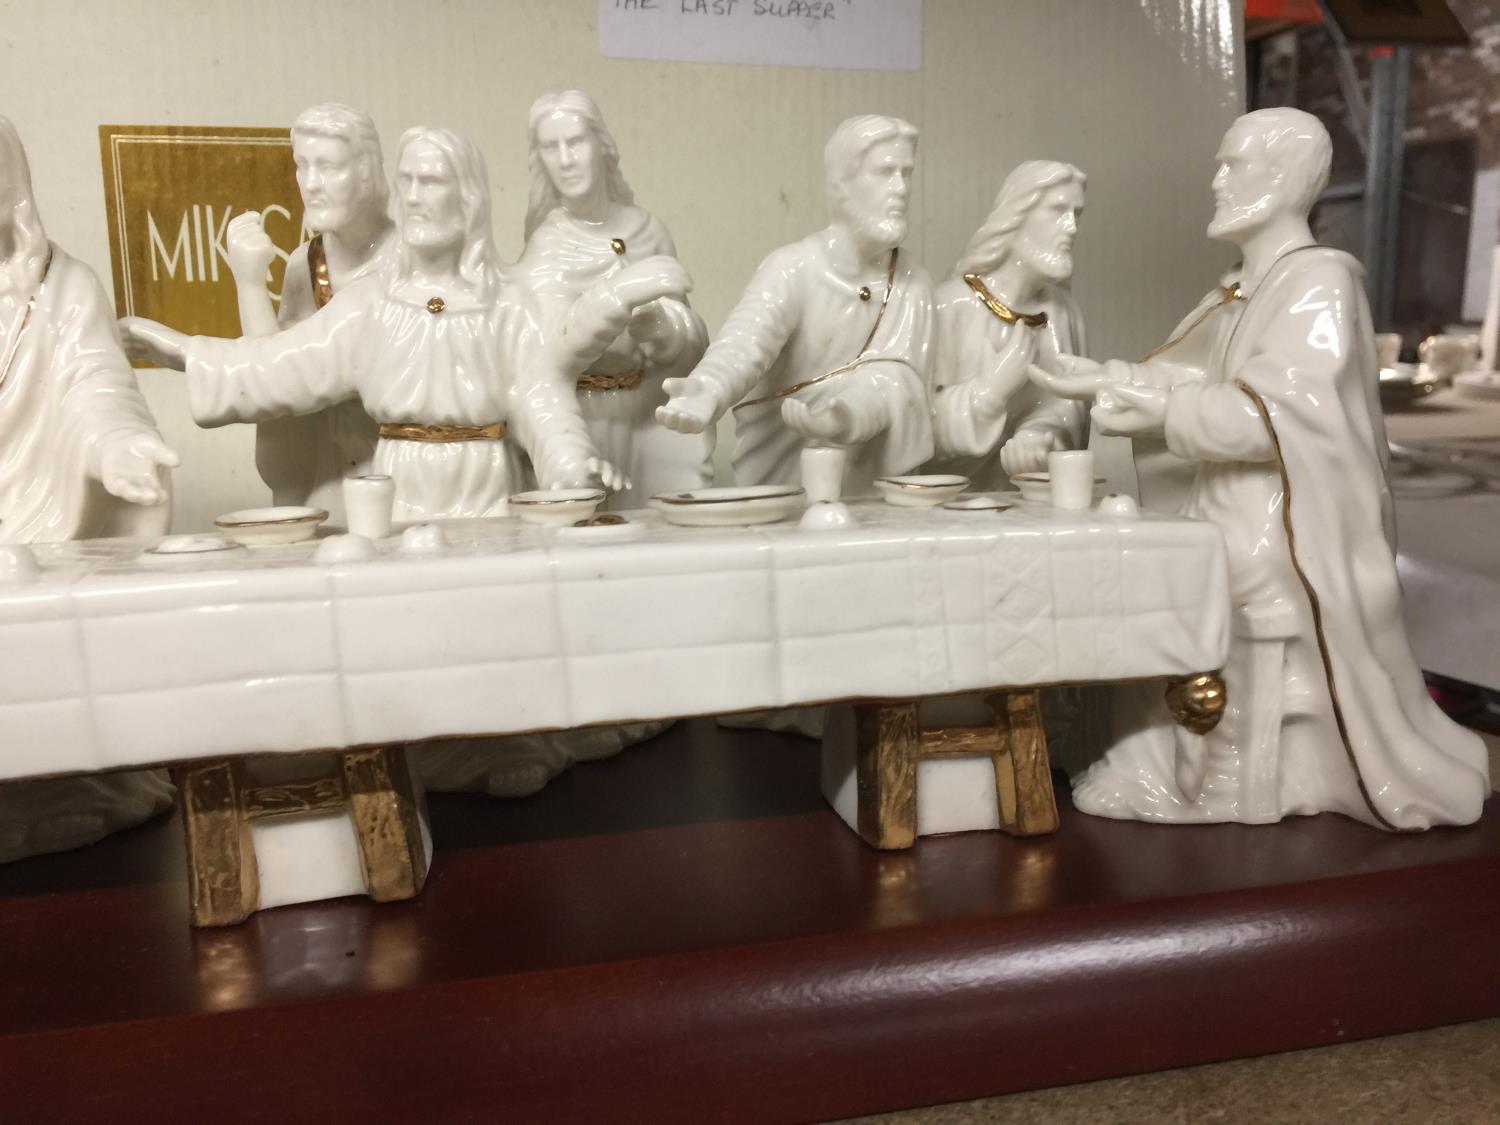 A CERAMIC REPRESENTATION OF JESUS CHRIST WITH HIS DISCIPLES AT THE LAST SUPPER BY MIKASA - Image 4 of 4